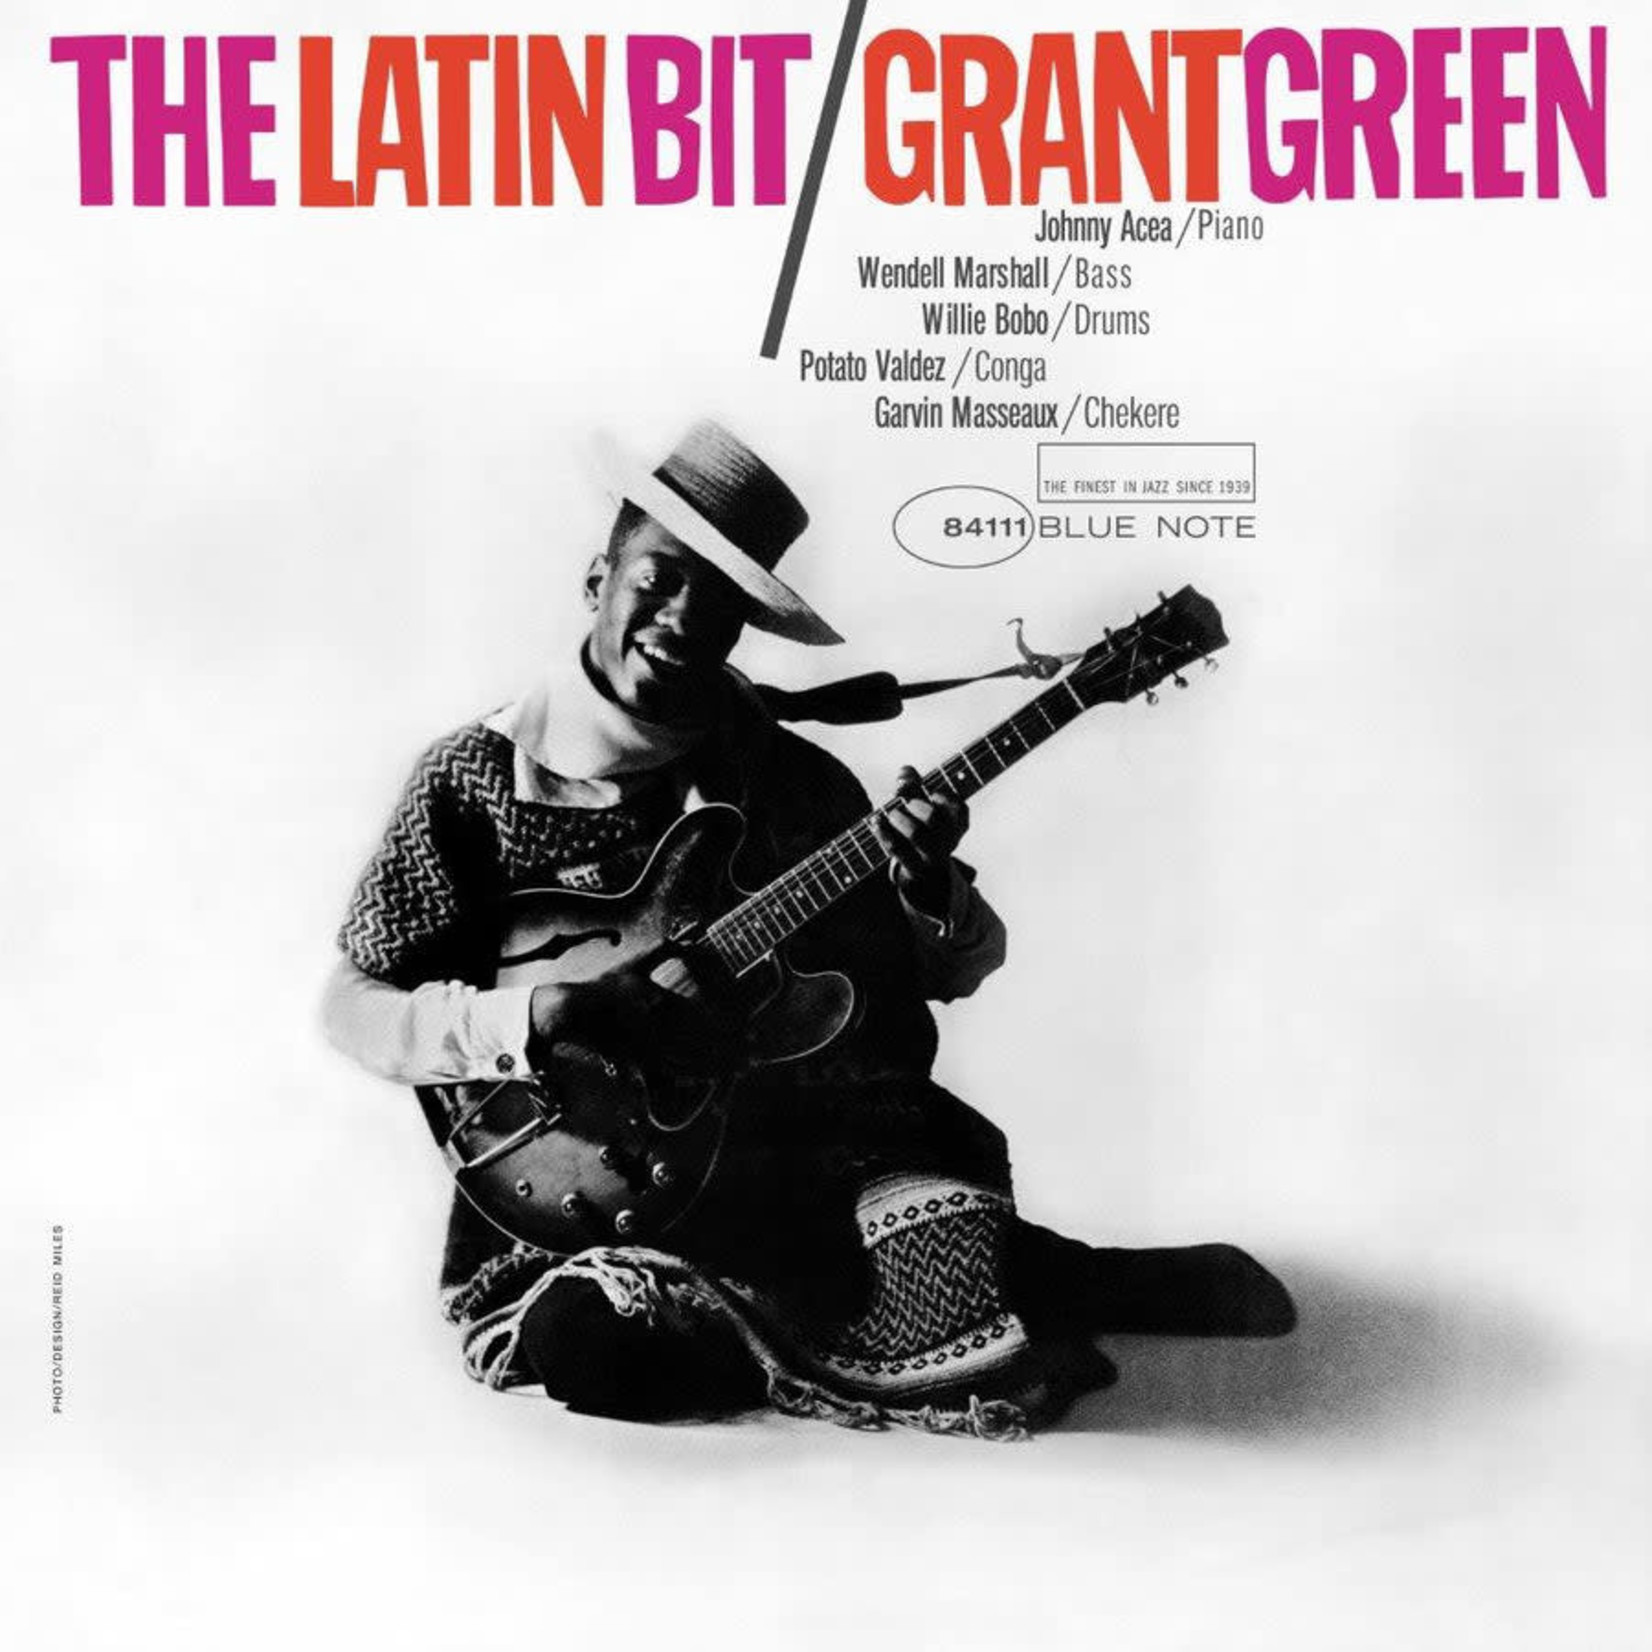 [New] Grant Green - The Latin Bit (Blue Note Tone Poet series)